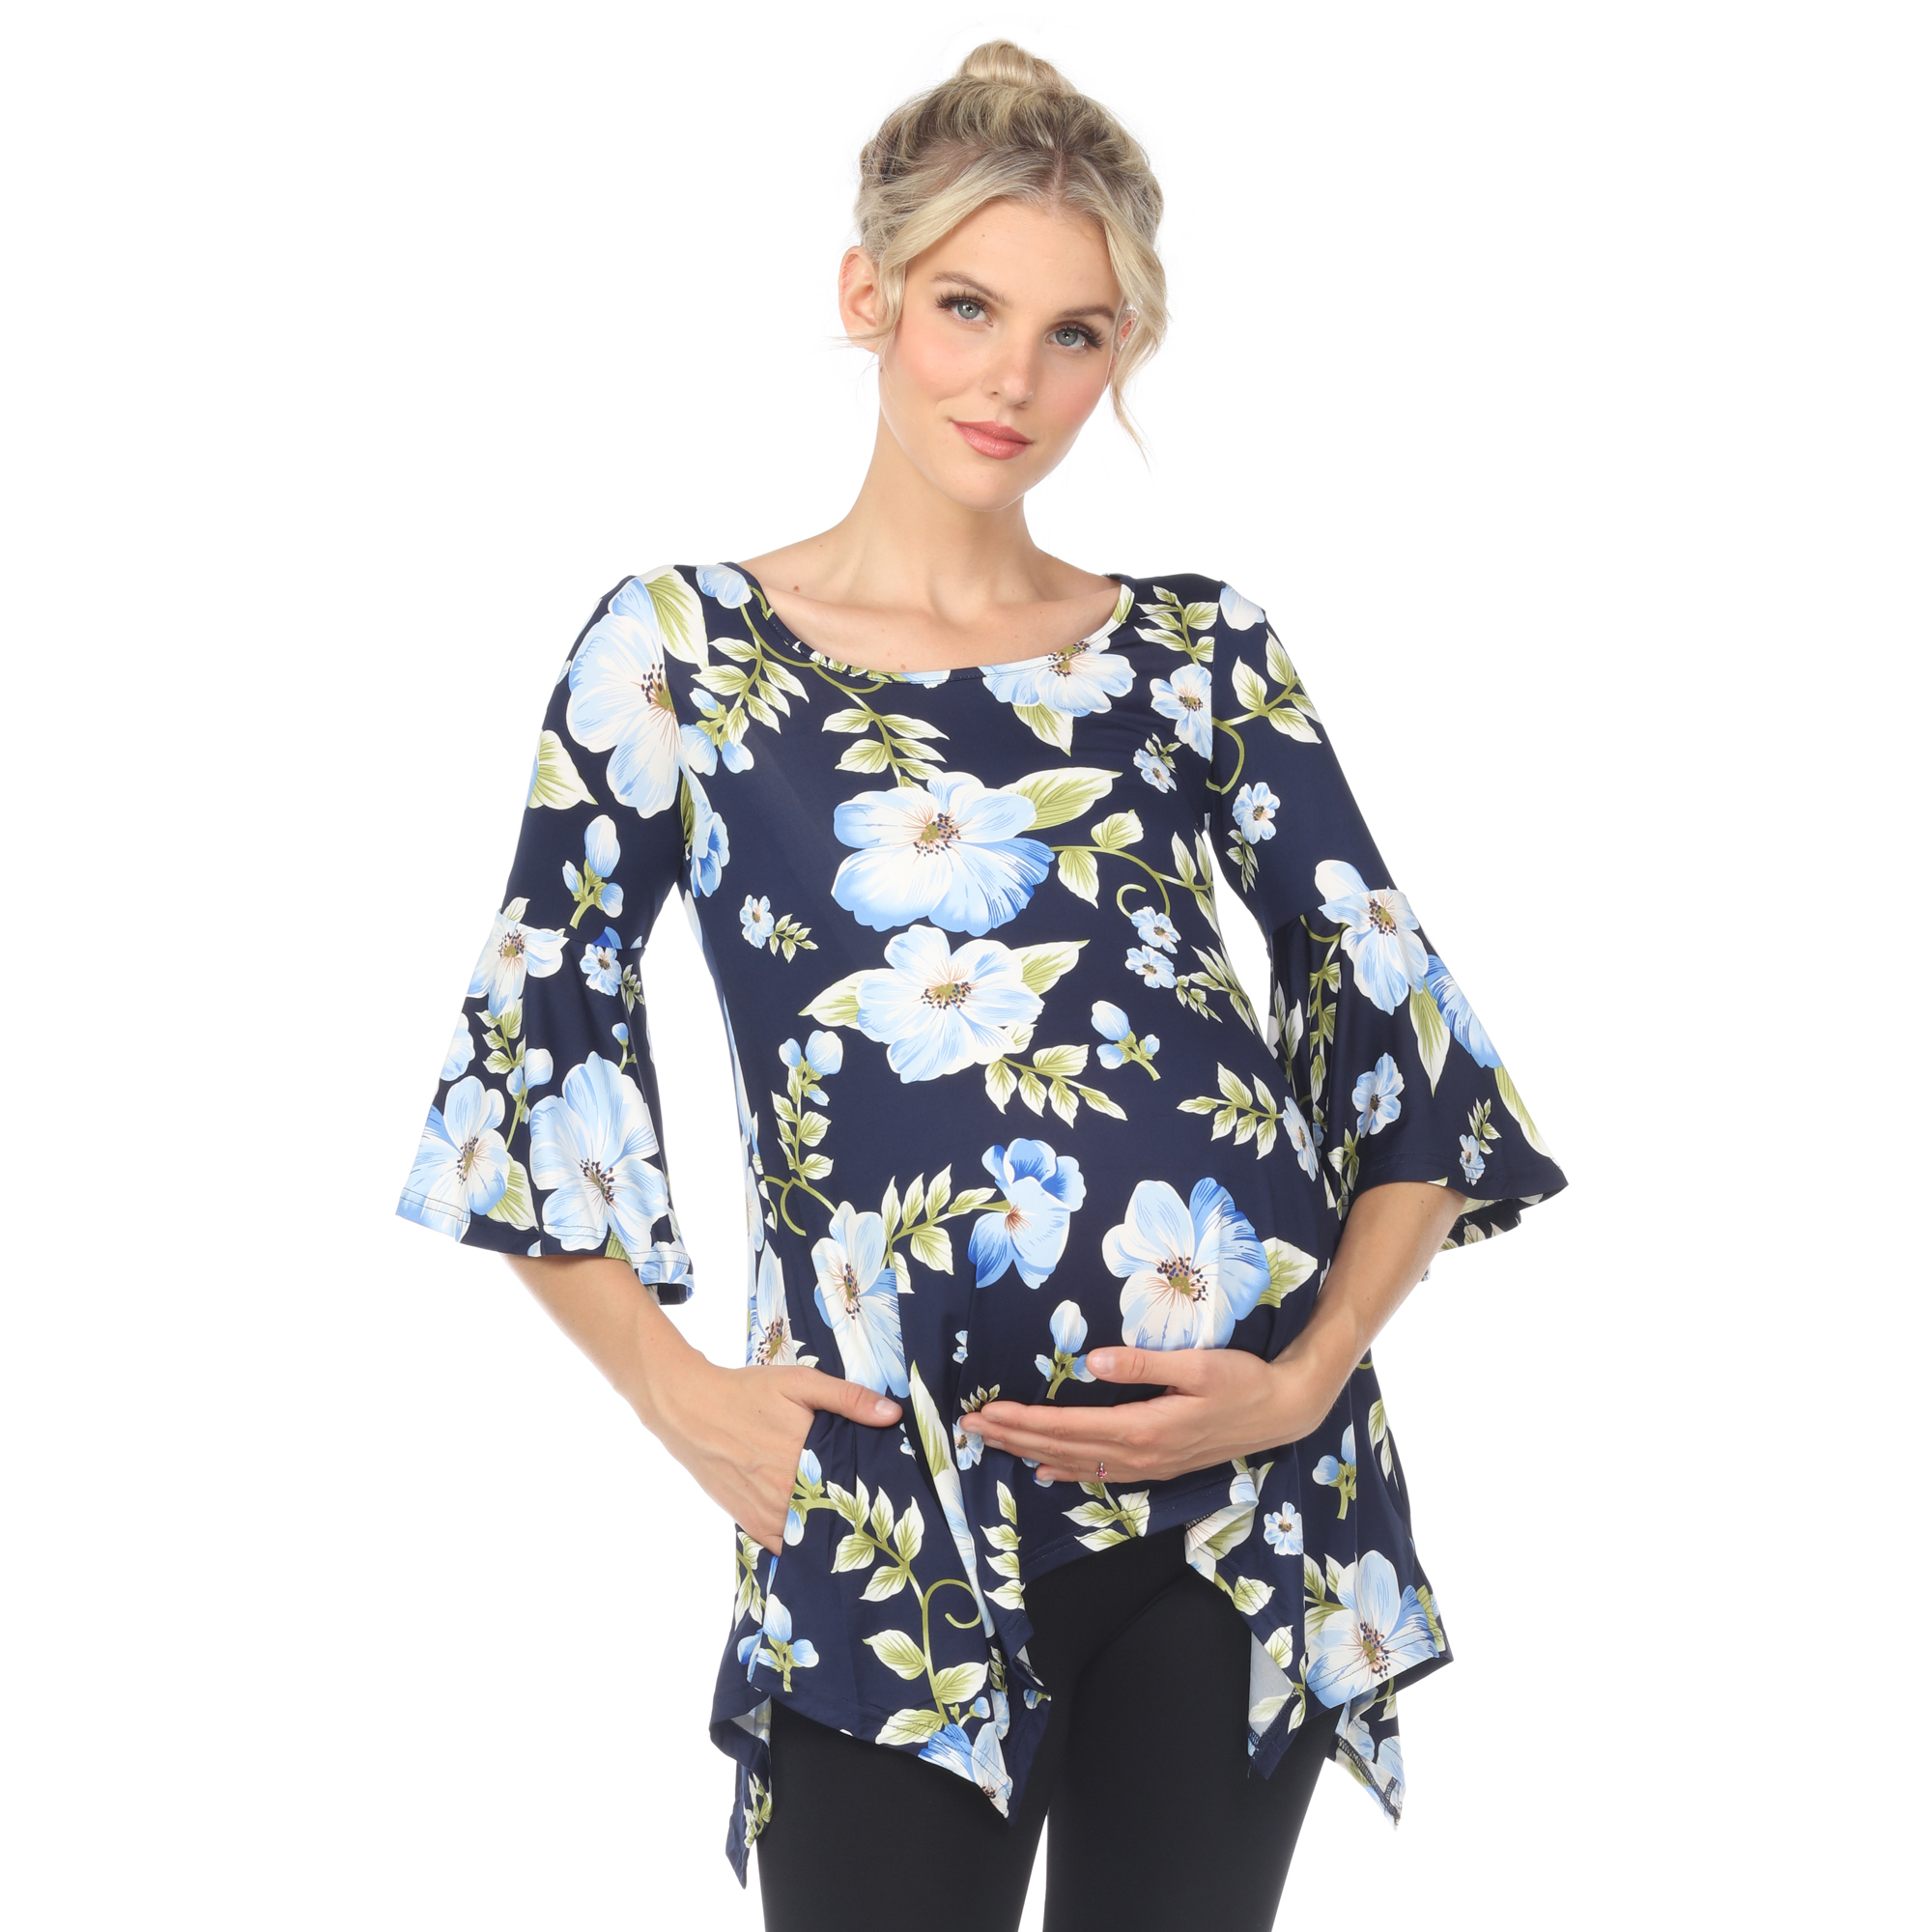 White Mark Women's Maternity Floral Print Quarter Sleeve Tunic Top With Pockets - Blue Flower, Large